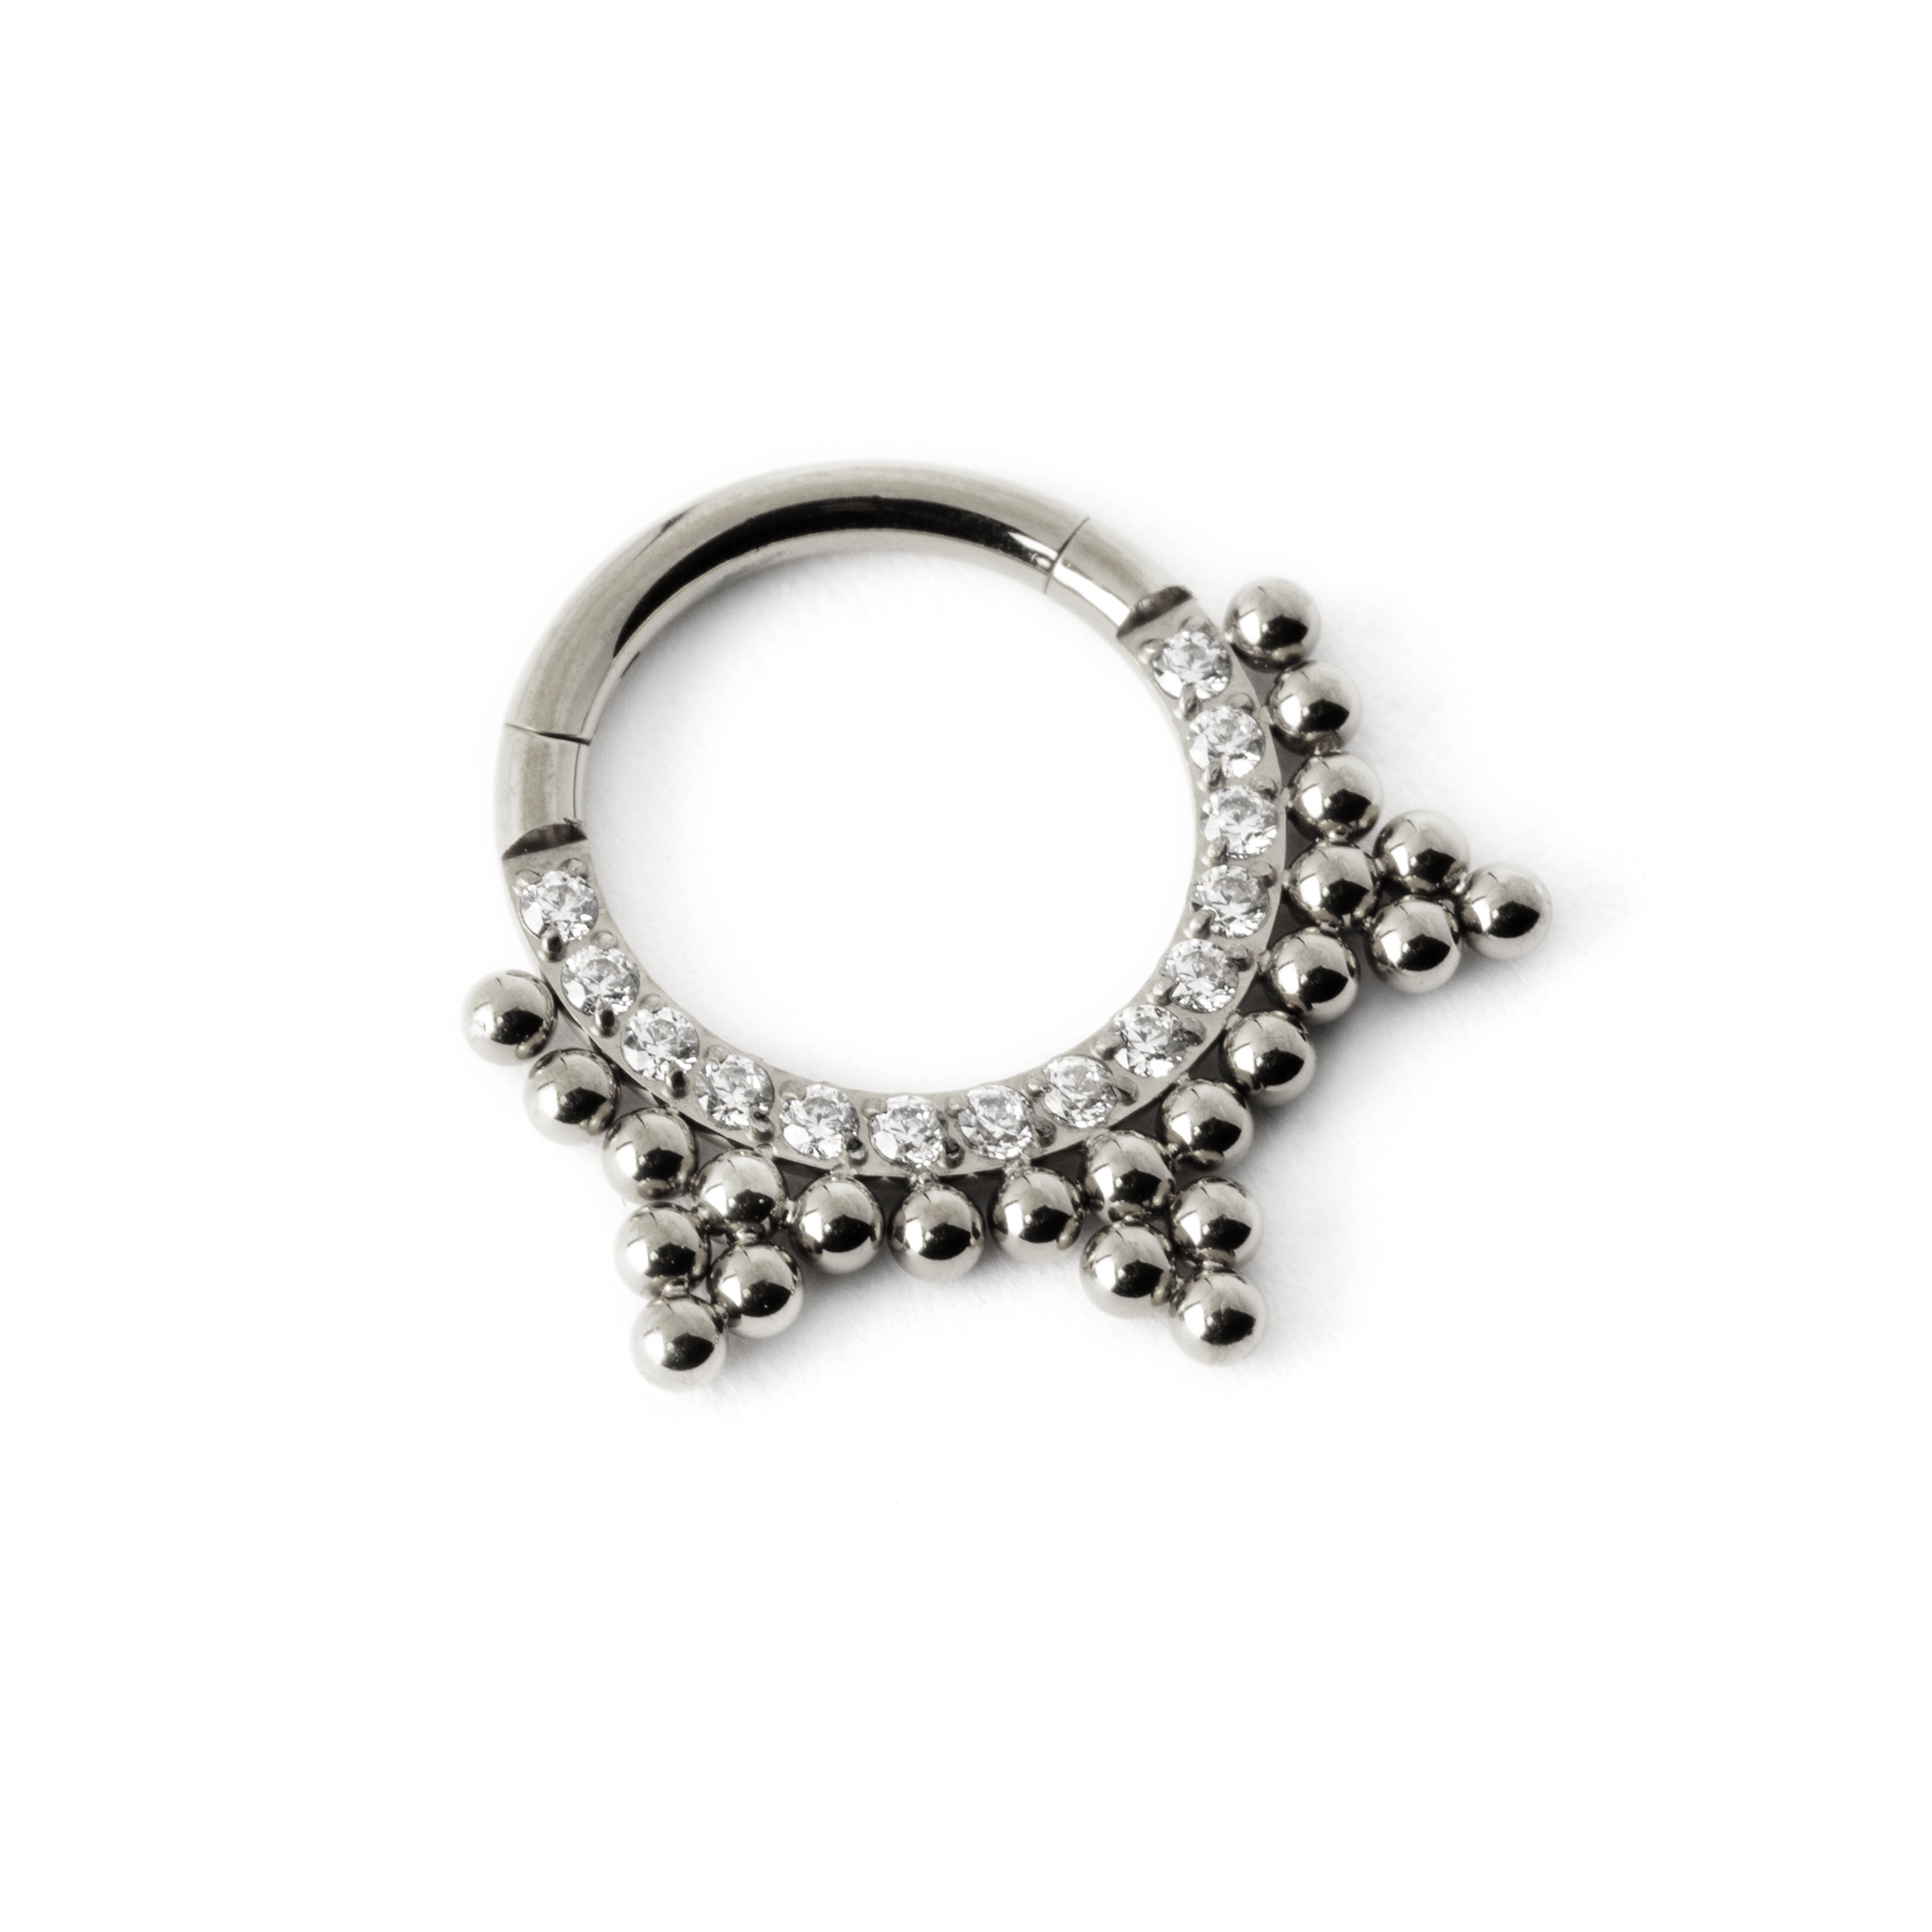 Dharma Septum Clicker left side view